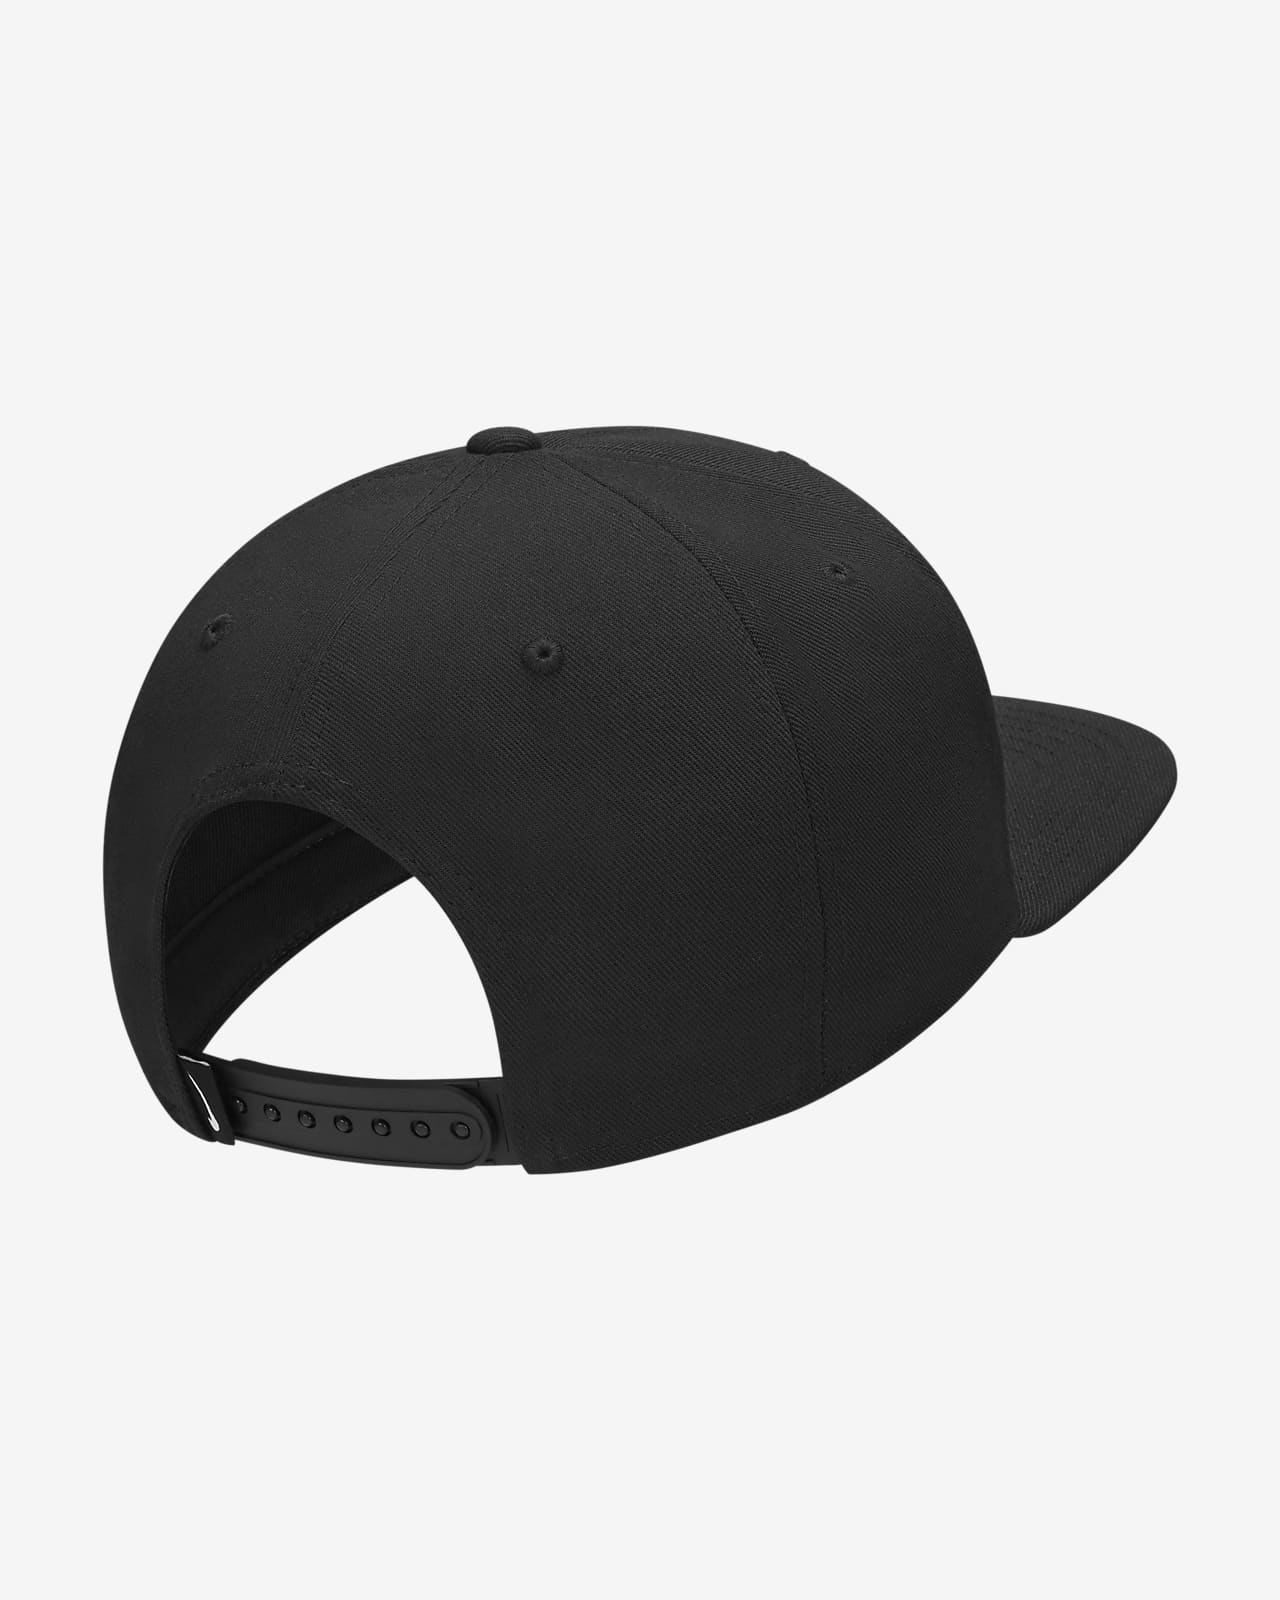 nike dri fit fitted hat